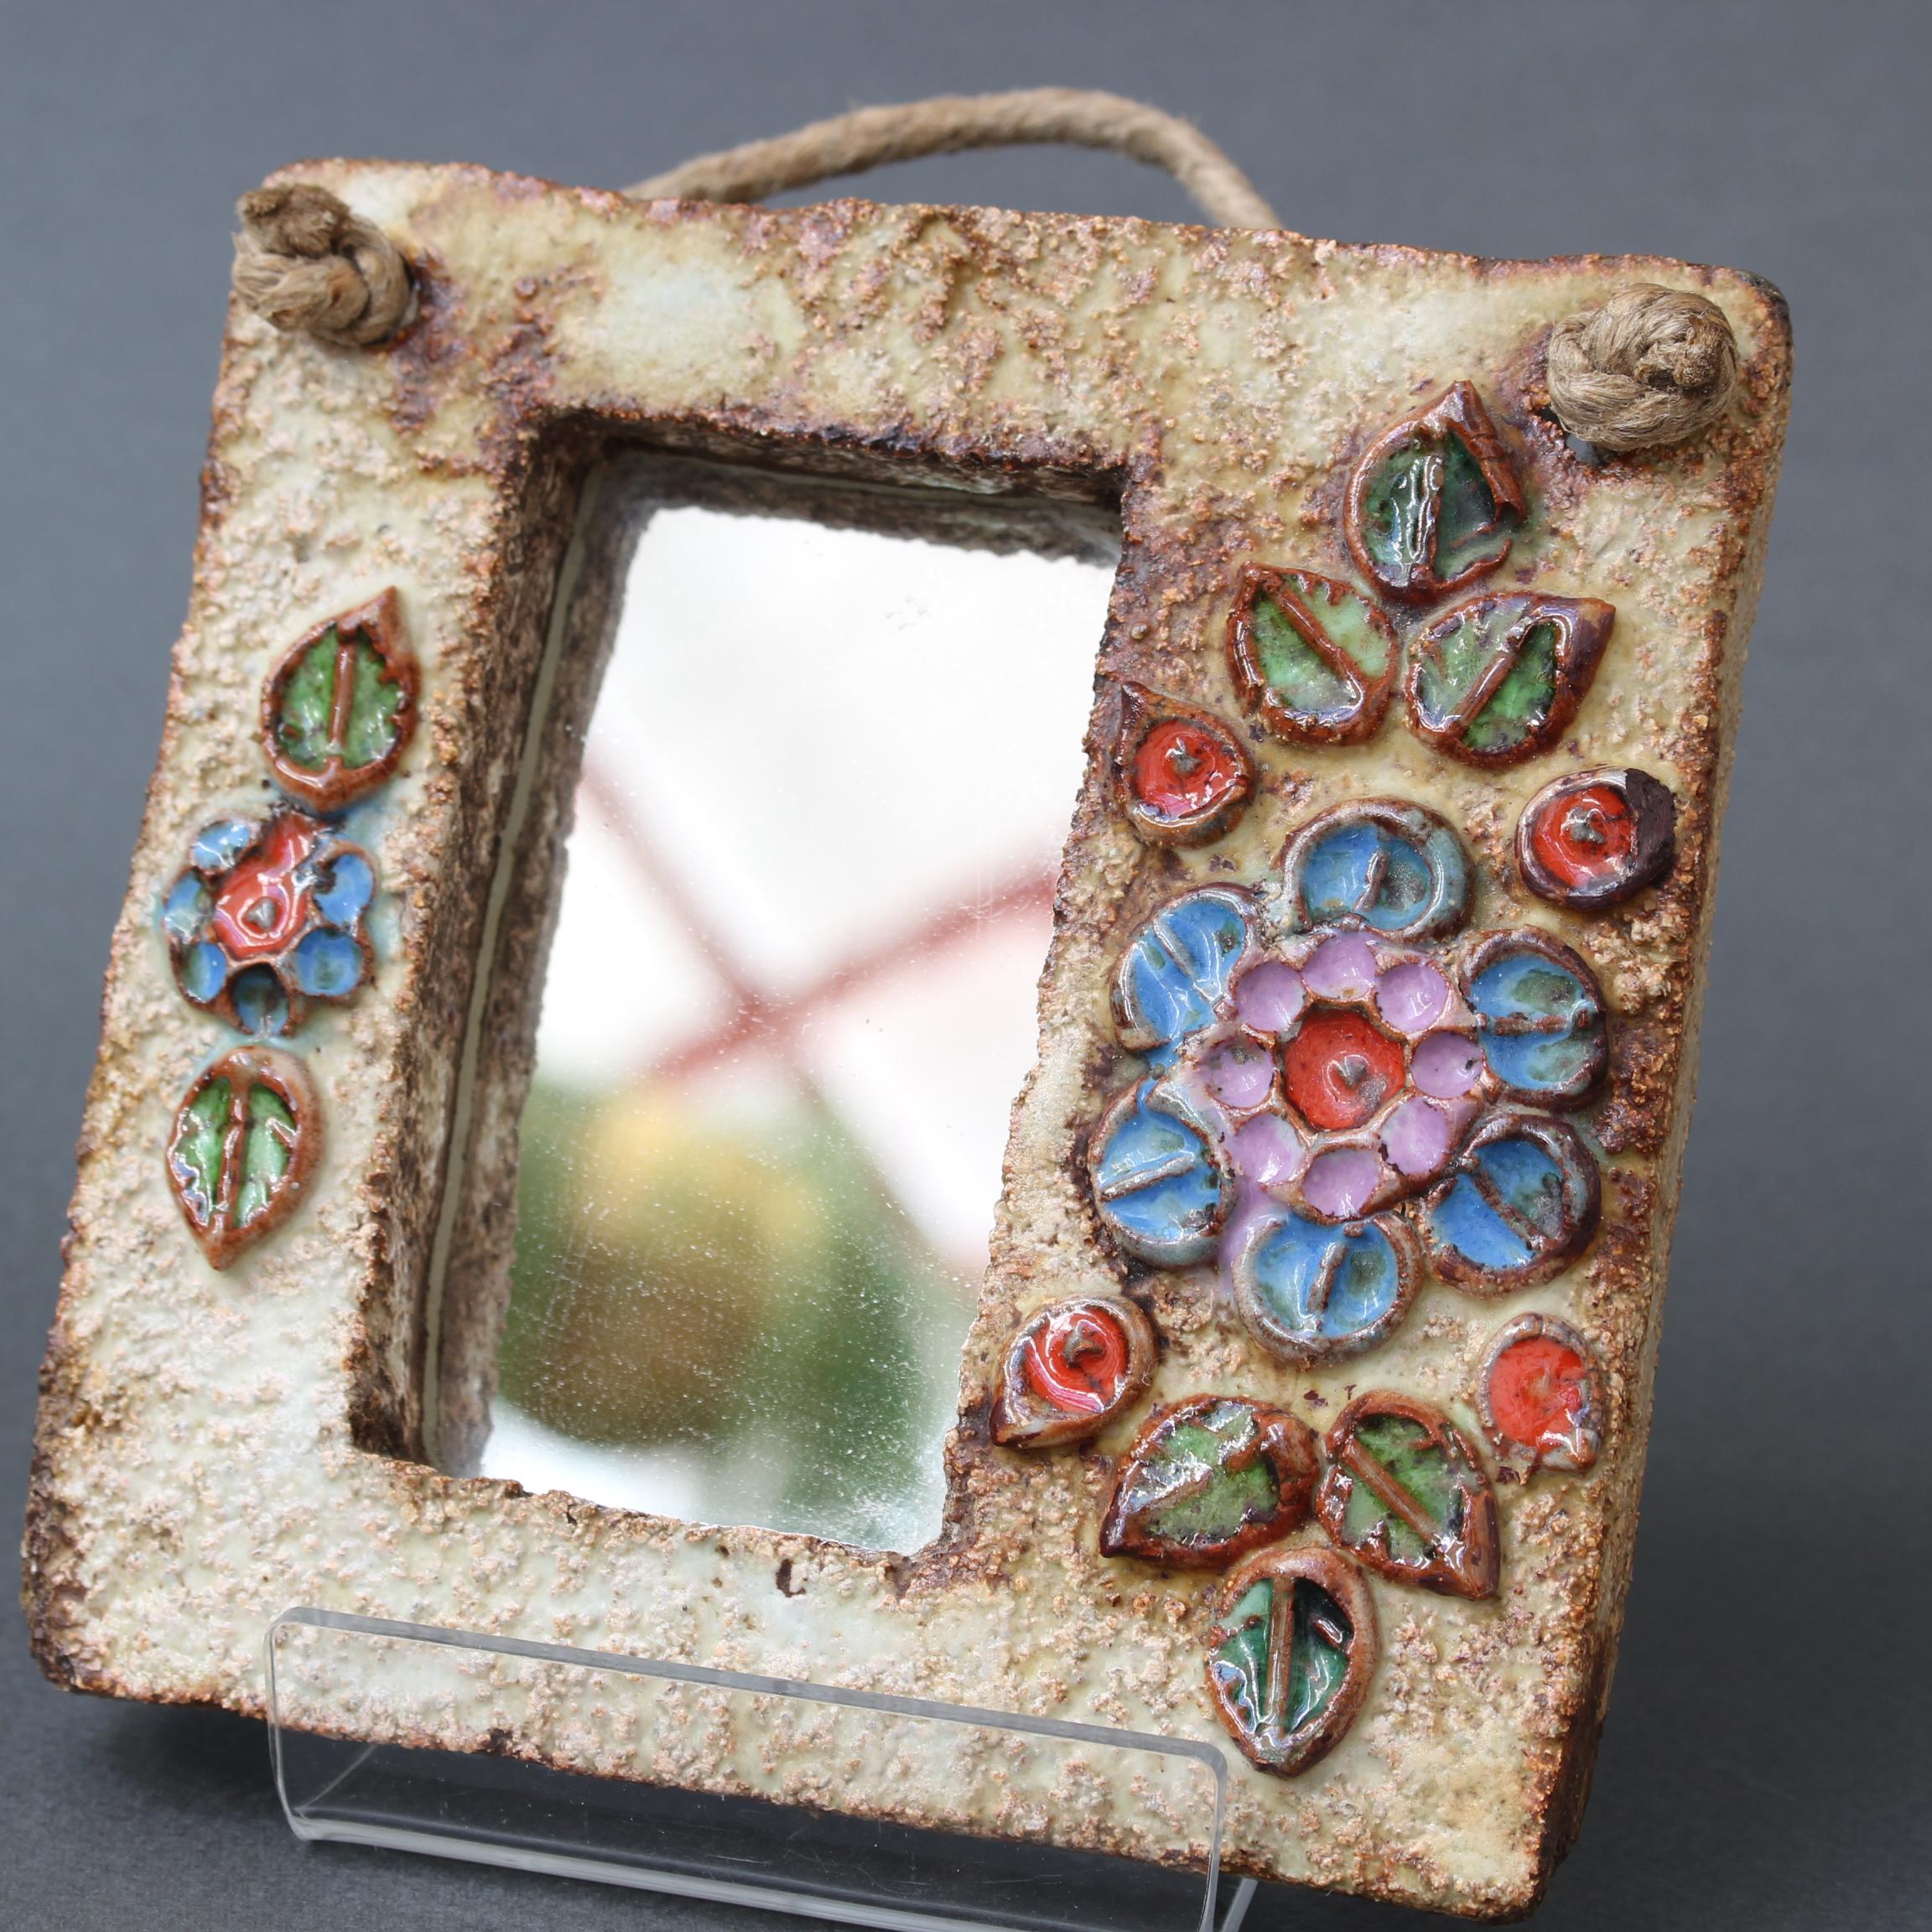 French Ceramic Wall Mirror with Flower Motif by La Roue 'circa 1960s', Small 7